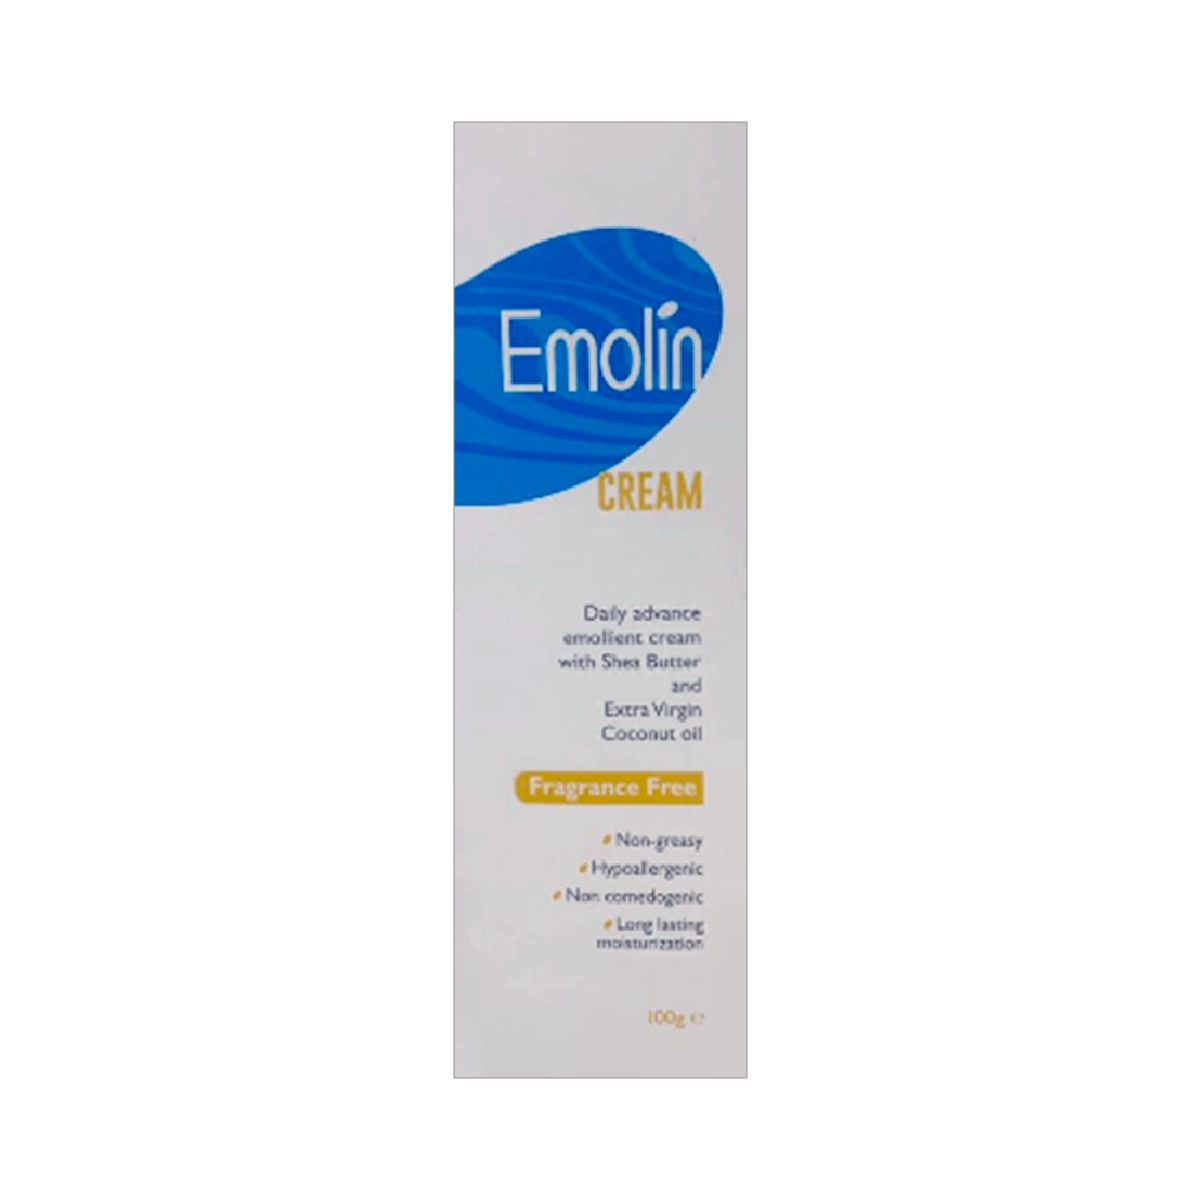 First product image of Emolin Daily Advance Emollient Cream 100g